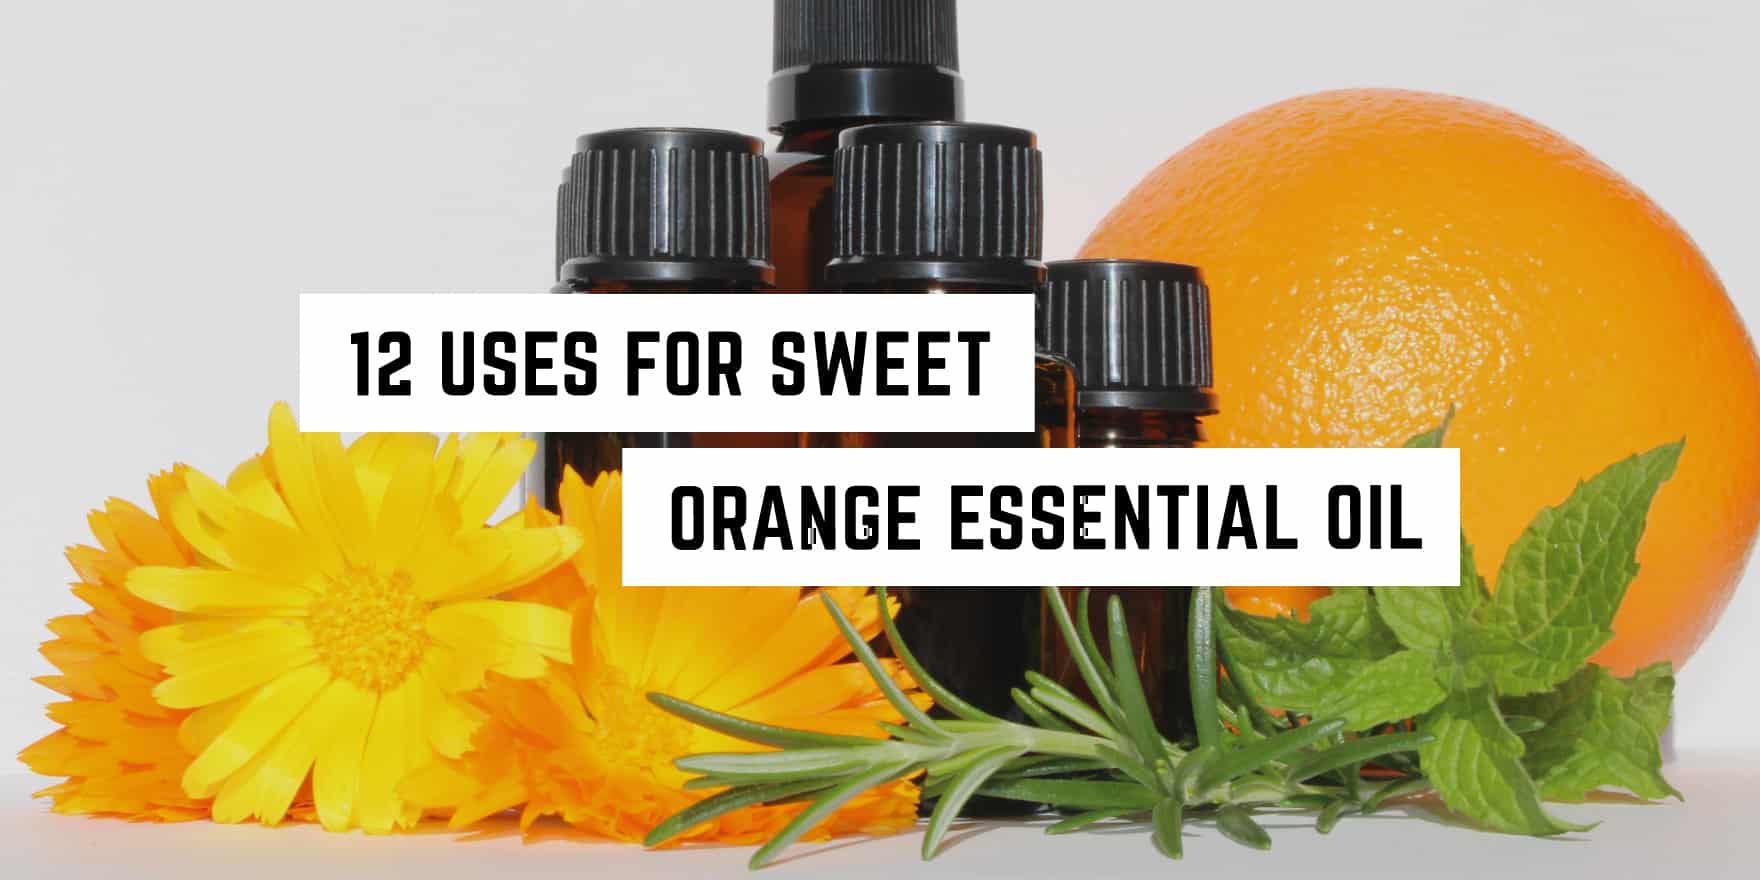 Bottles of orange essential oil with a fresh orange, green leaves, and a yellow flower, highlighting the various applications of this citrus-scented new age product.